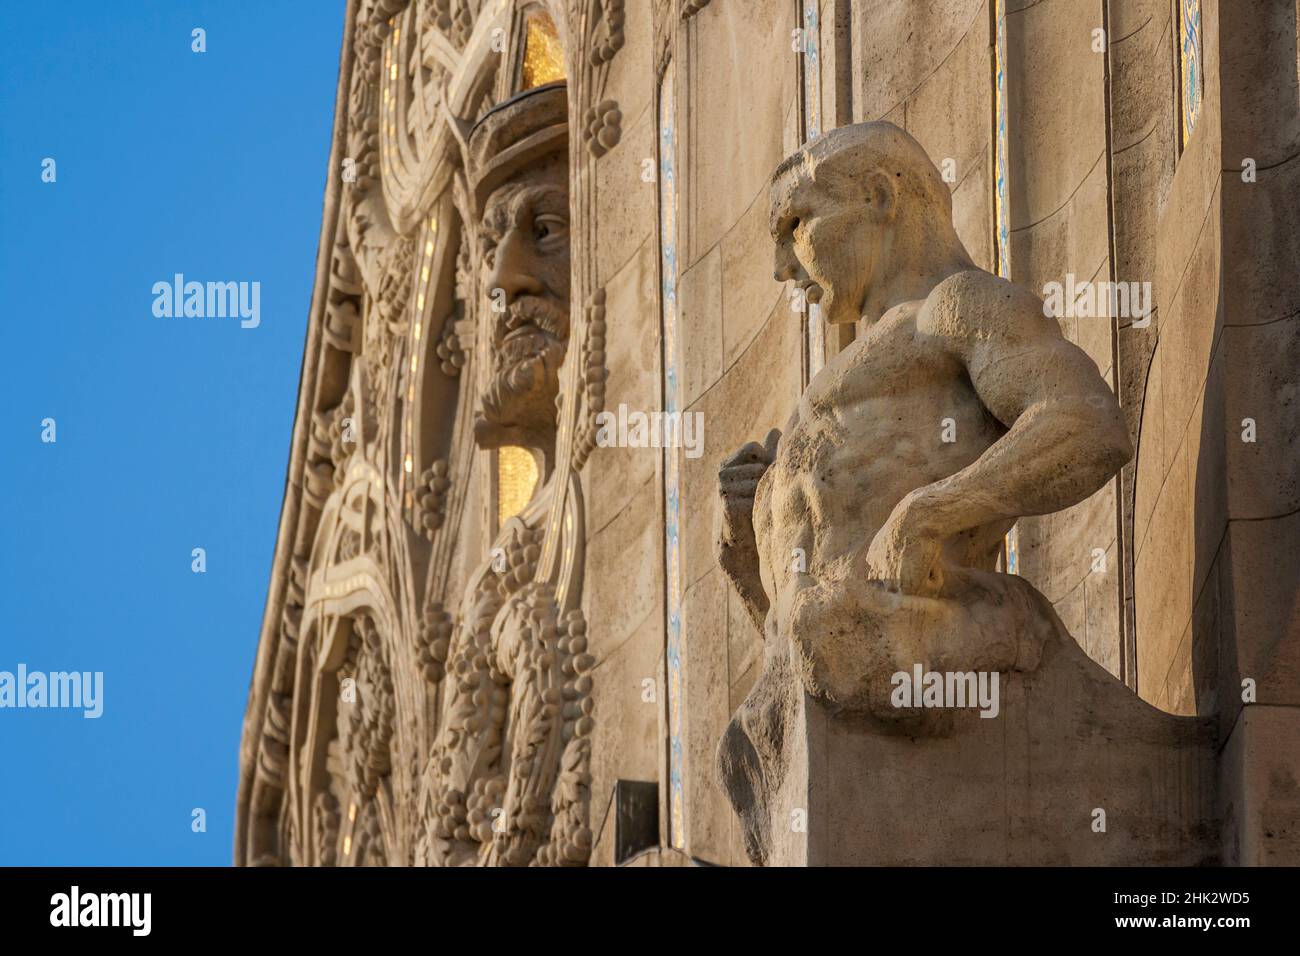 Bust of Sir Thomas Gresham on the facade of the Gresham Palace which opened in 2004 as a Four Seasons Hotel, Budapest, Capital of Hungary. Stock Photo